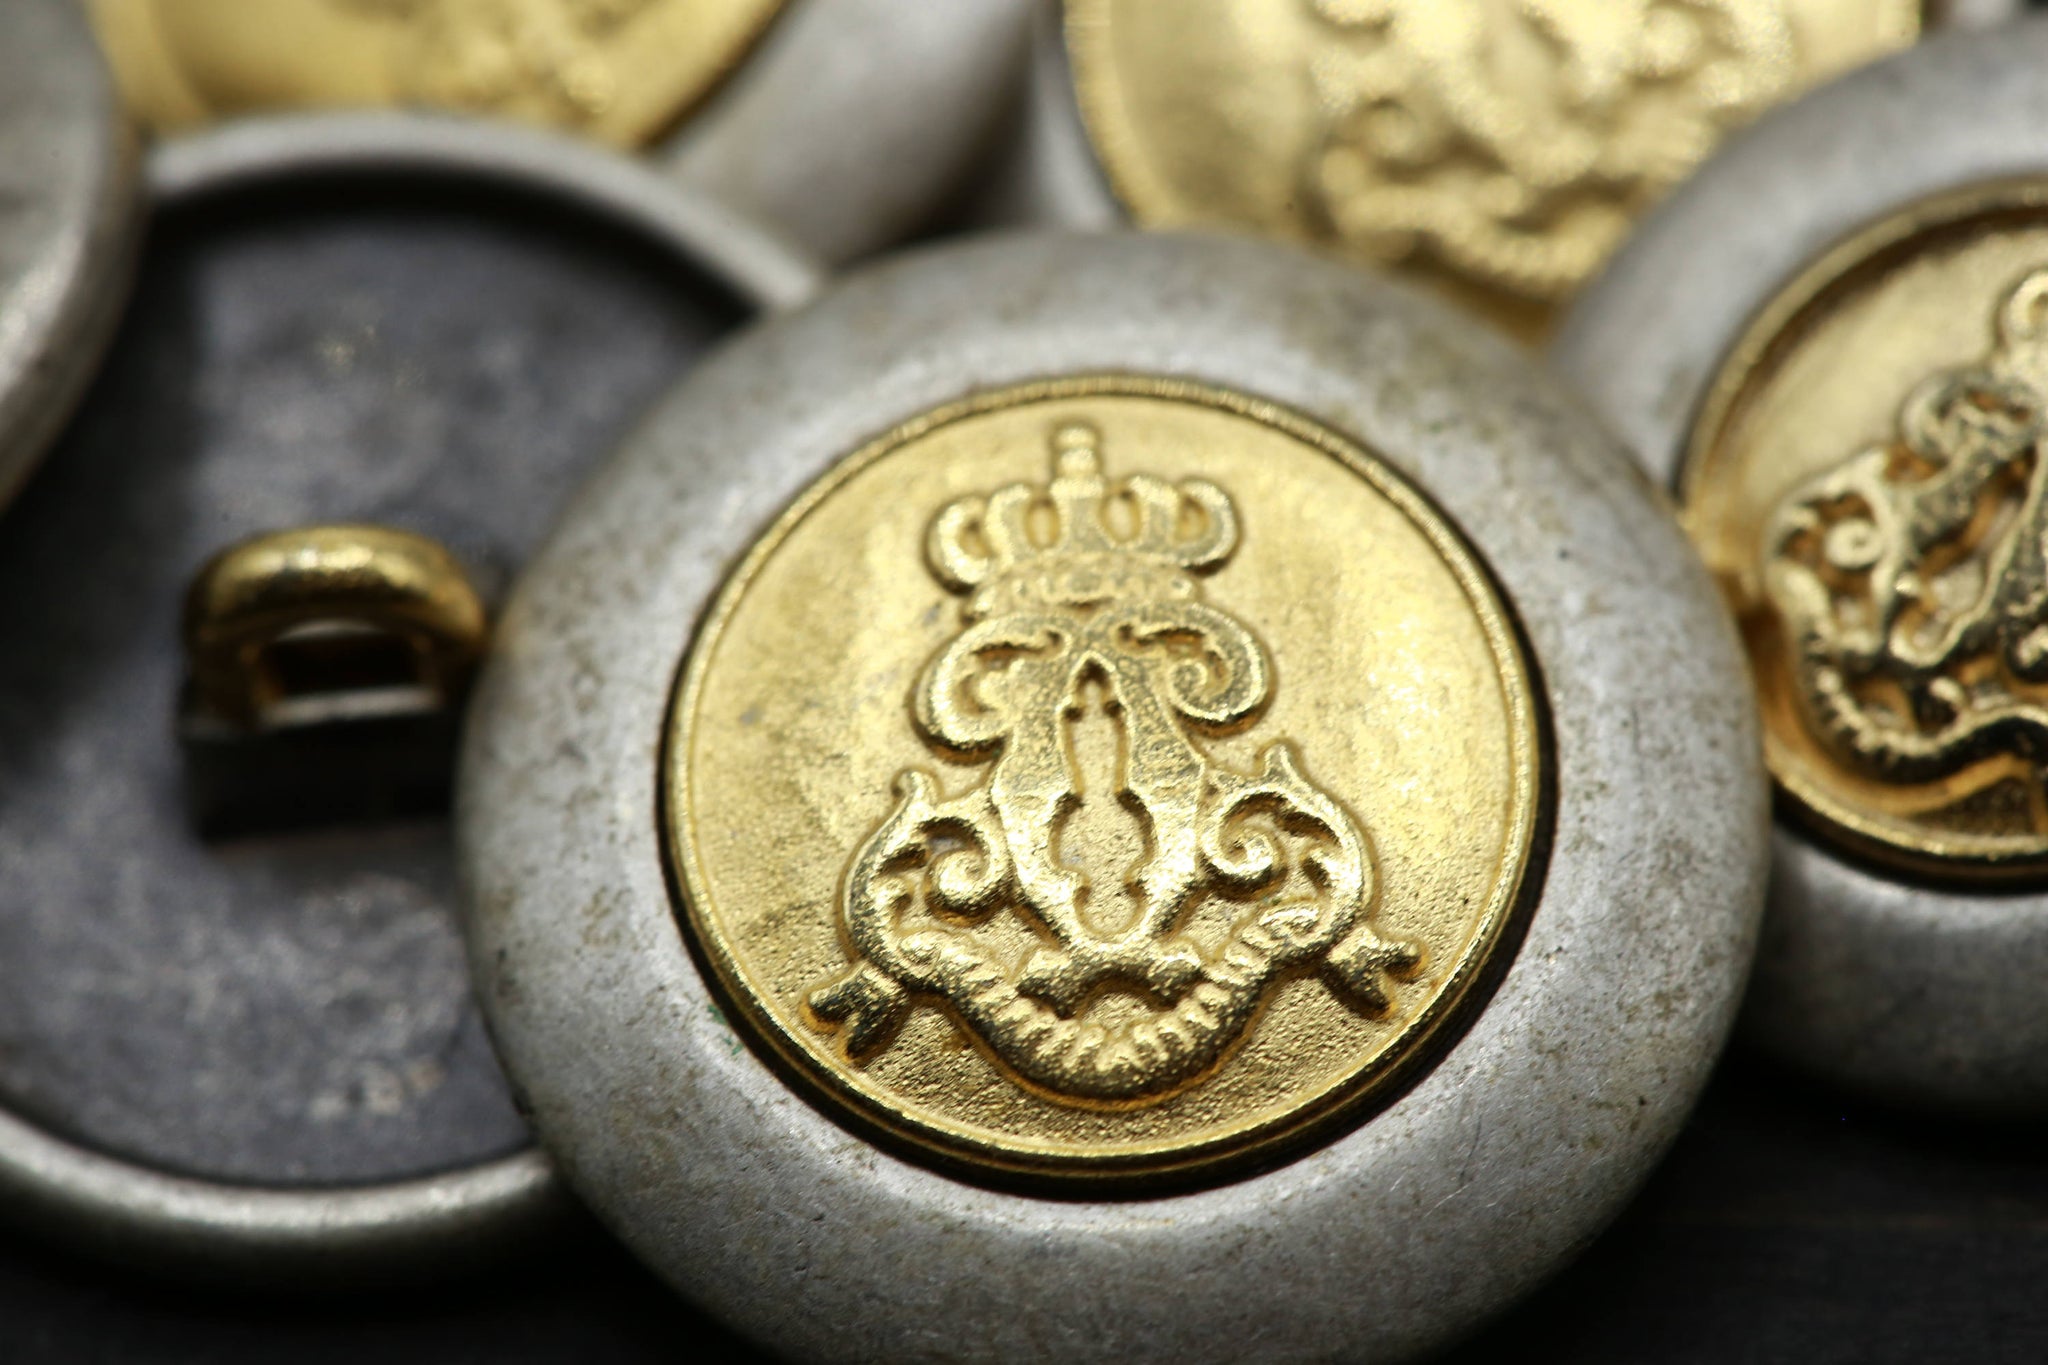 4 Silver and Gold Royal Crest Metal Button